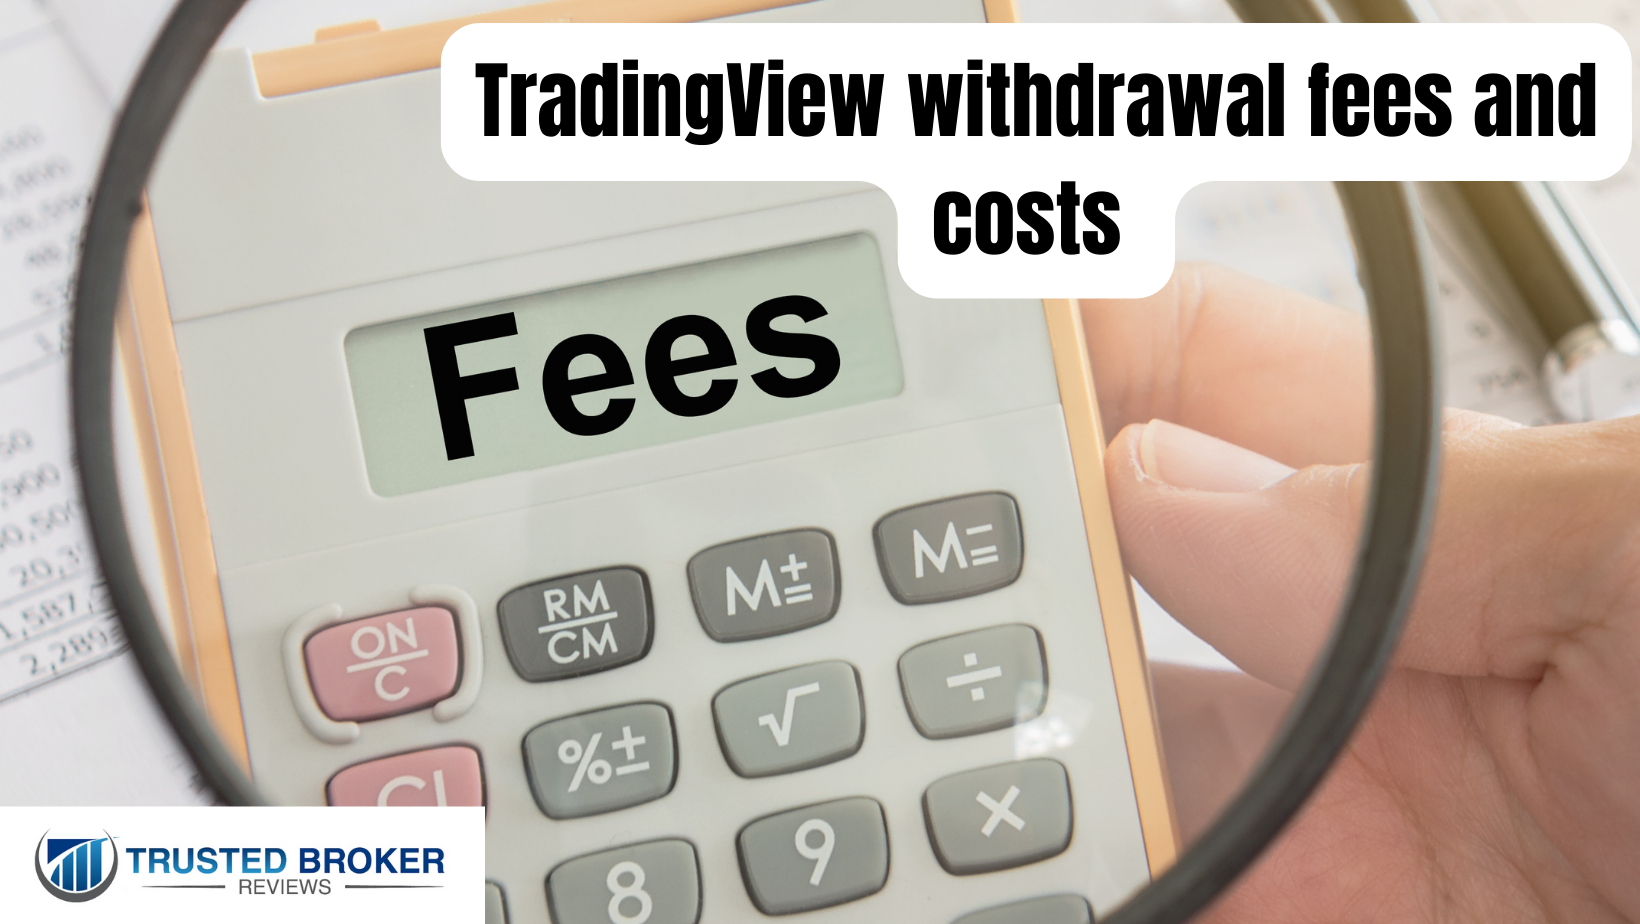 TradingView withdrawal fees and costs